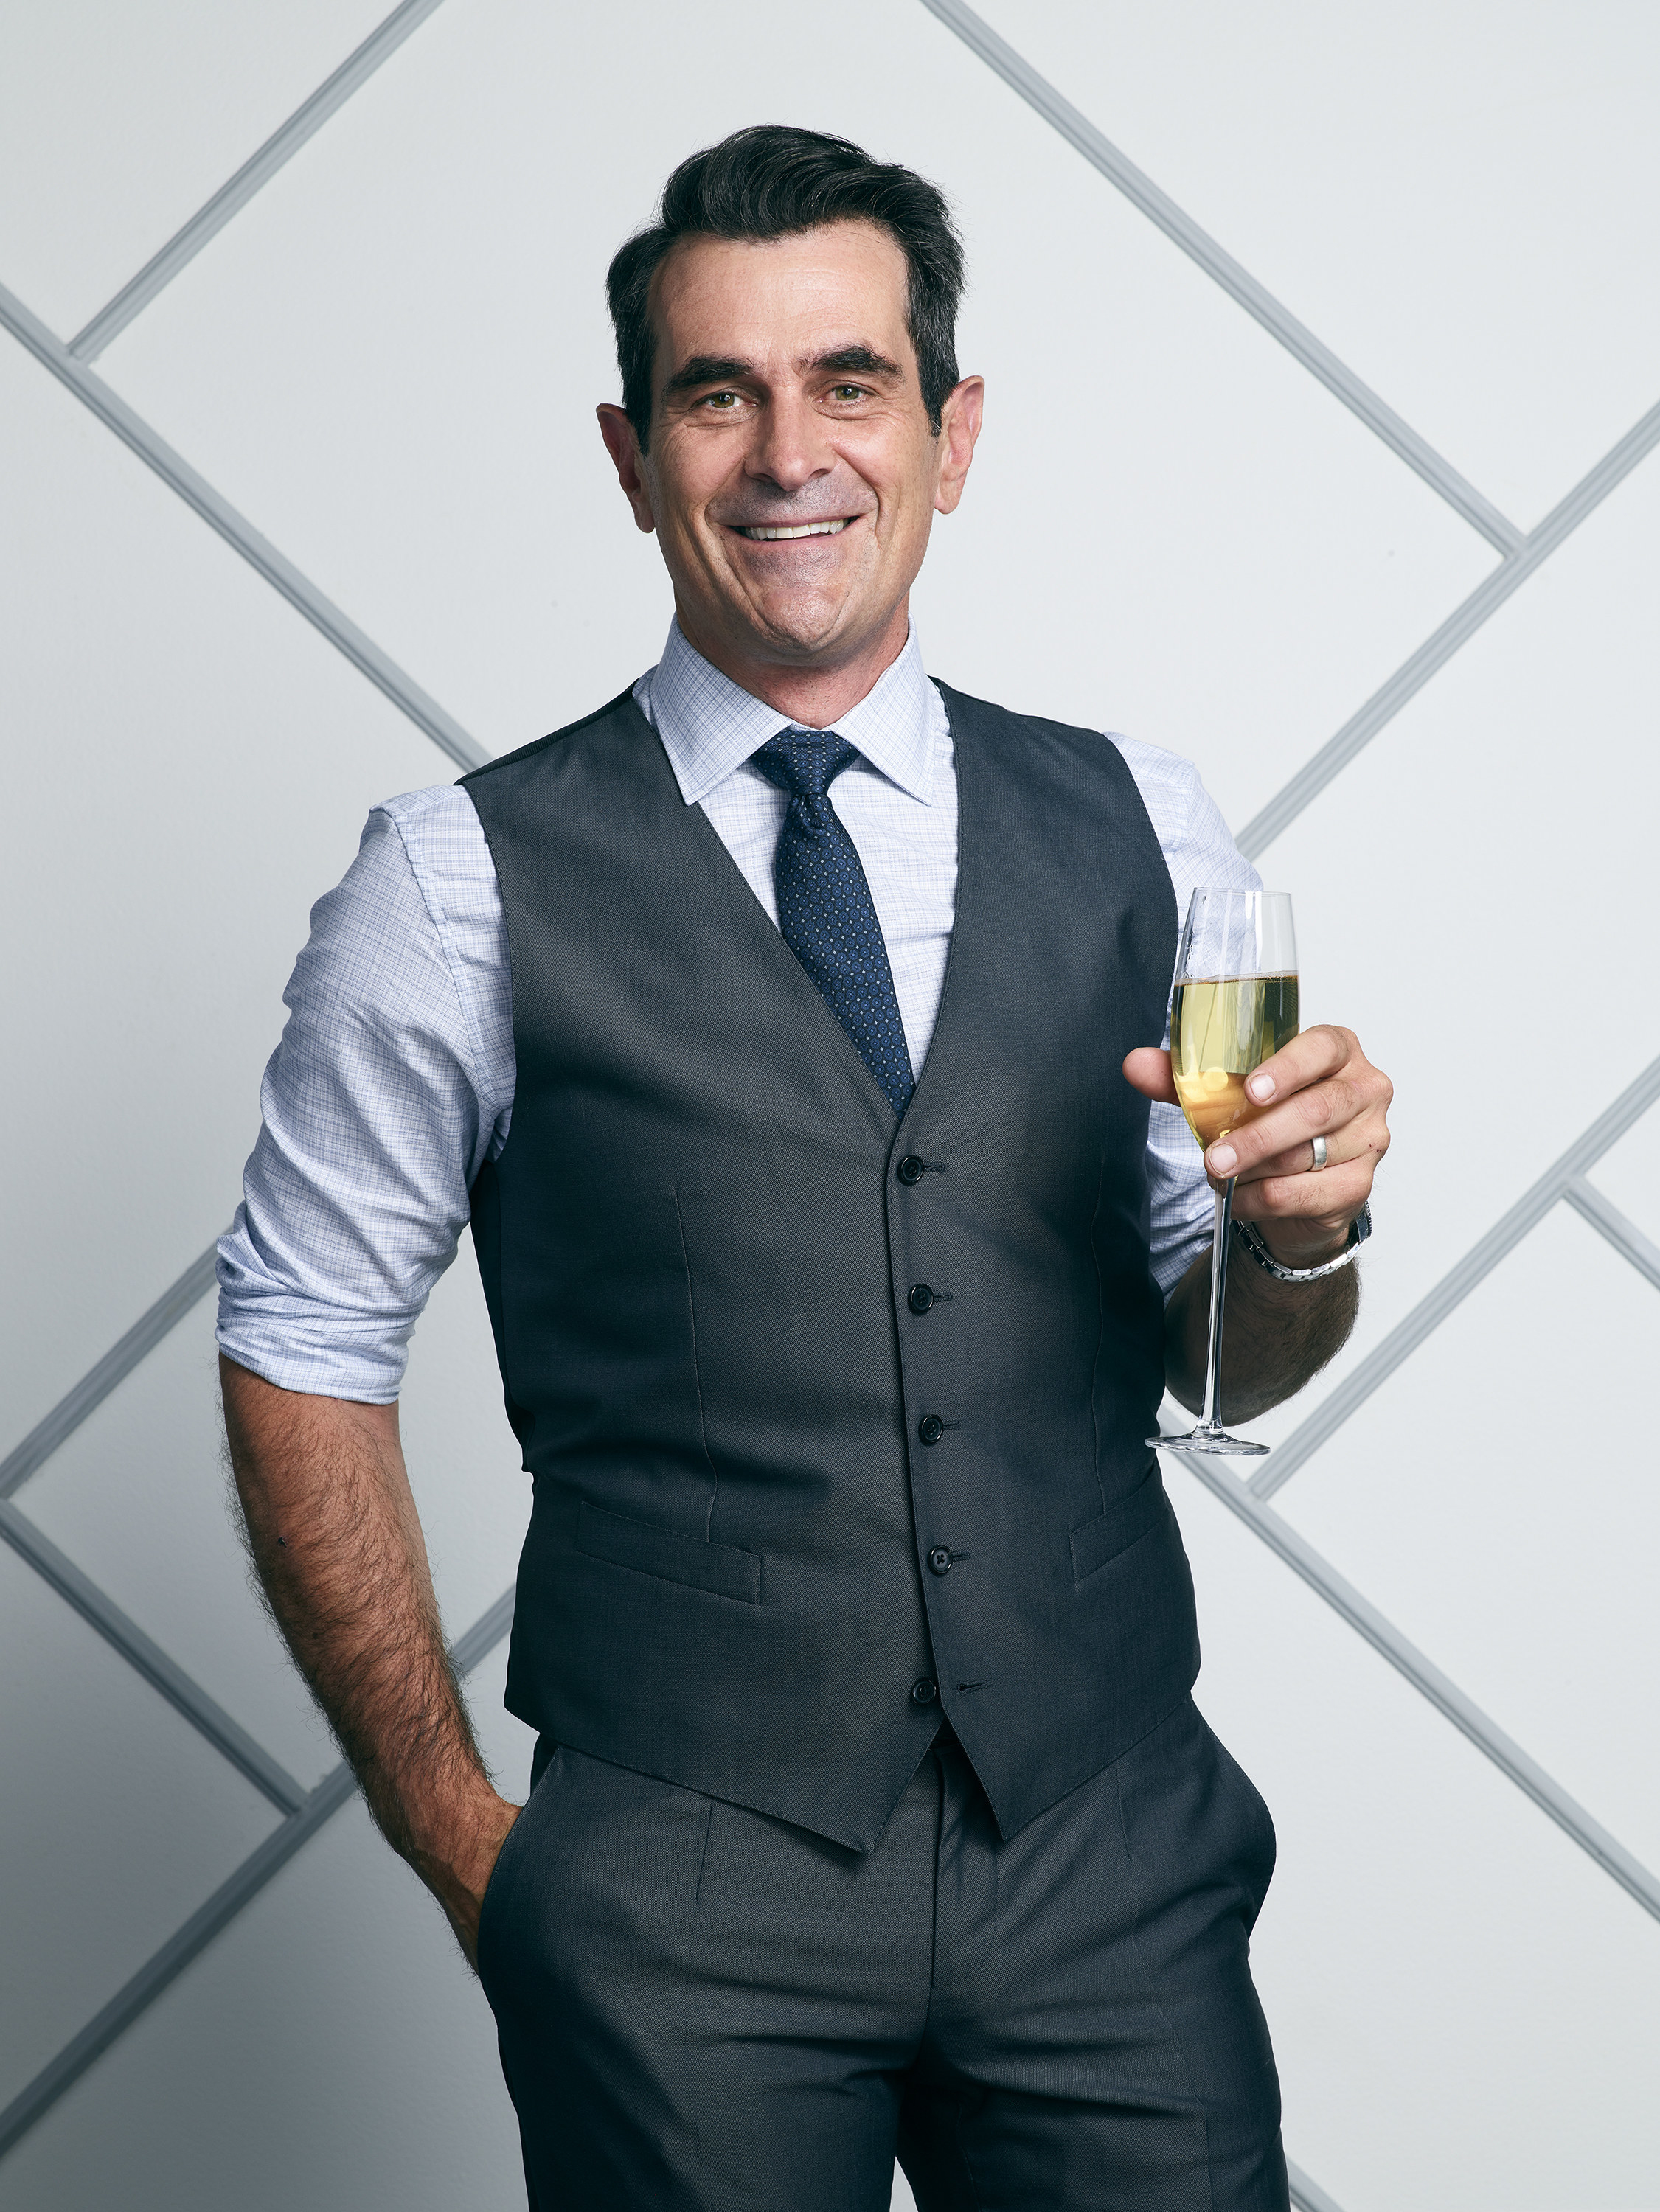 Ty in a vest and rolled-up sleeves, holding a champagne glass and smiling